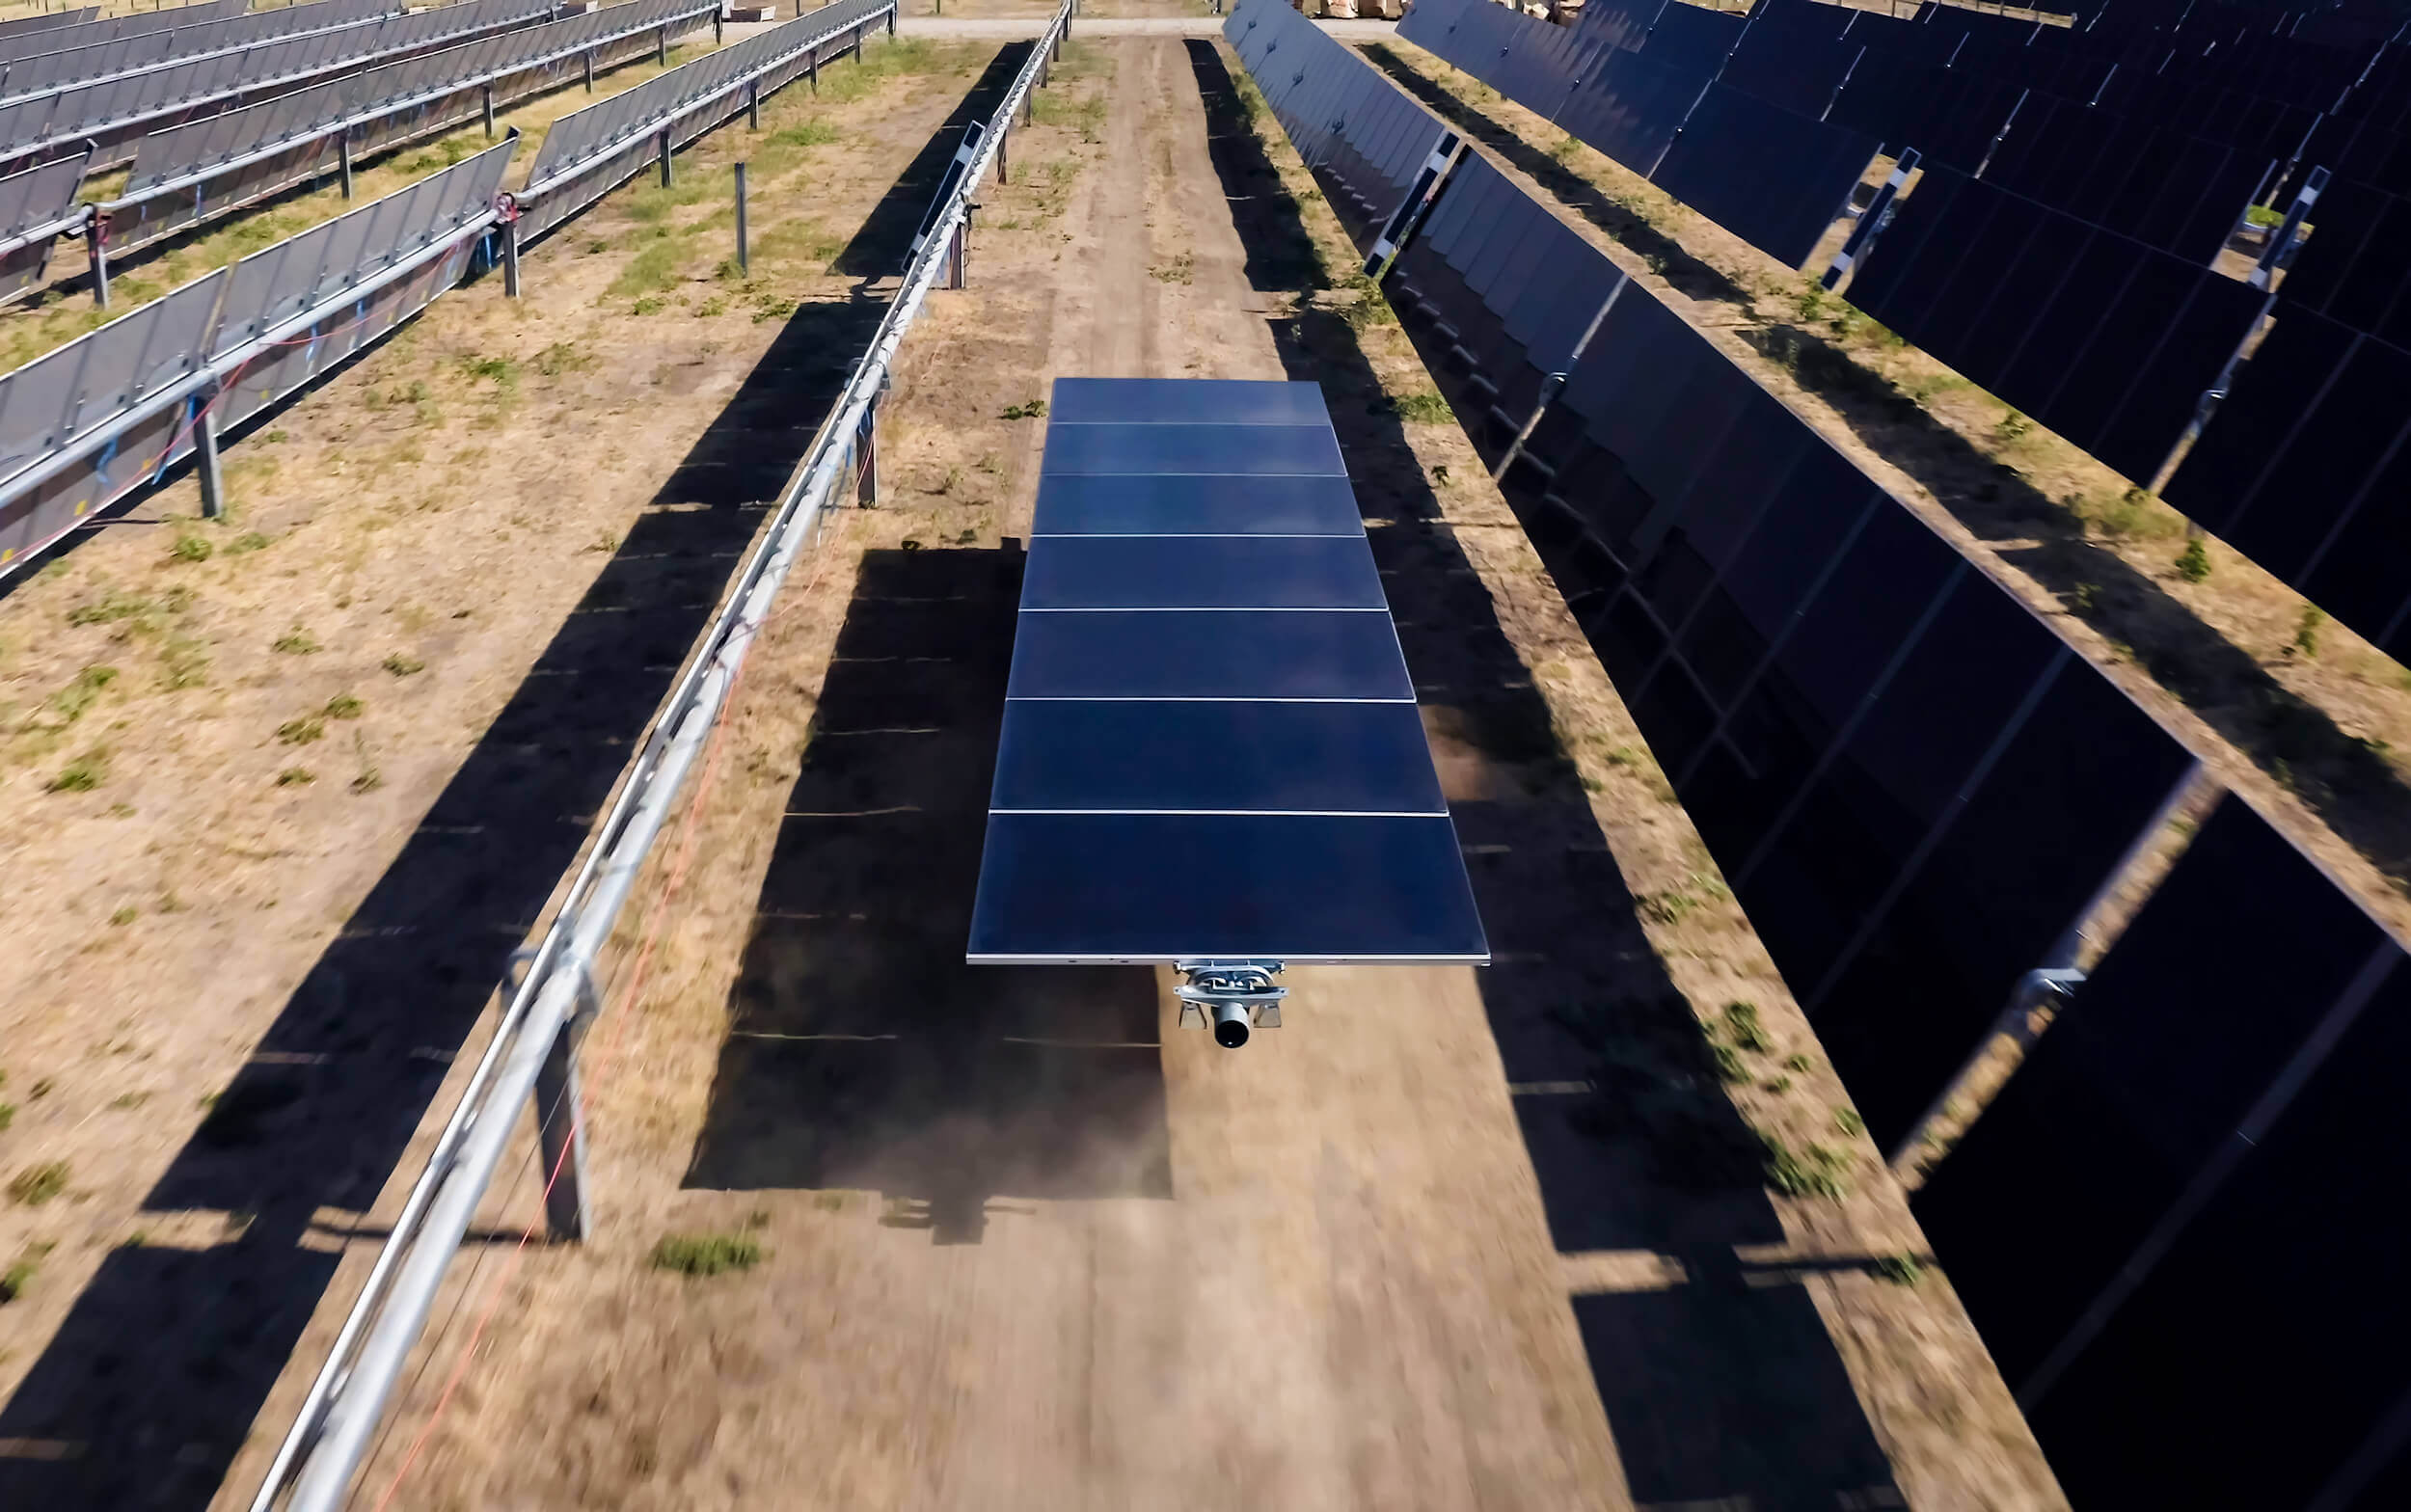 Terabase Energy Launches Terafab Automated Field Factory to Accelerate the Deployment of Solar Power Plants